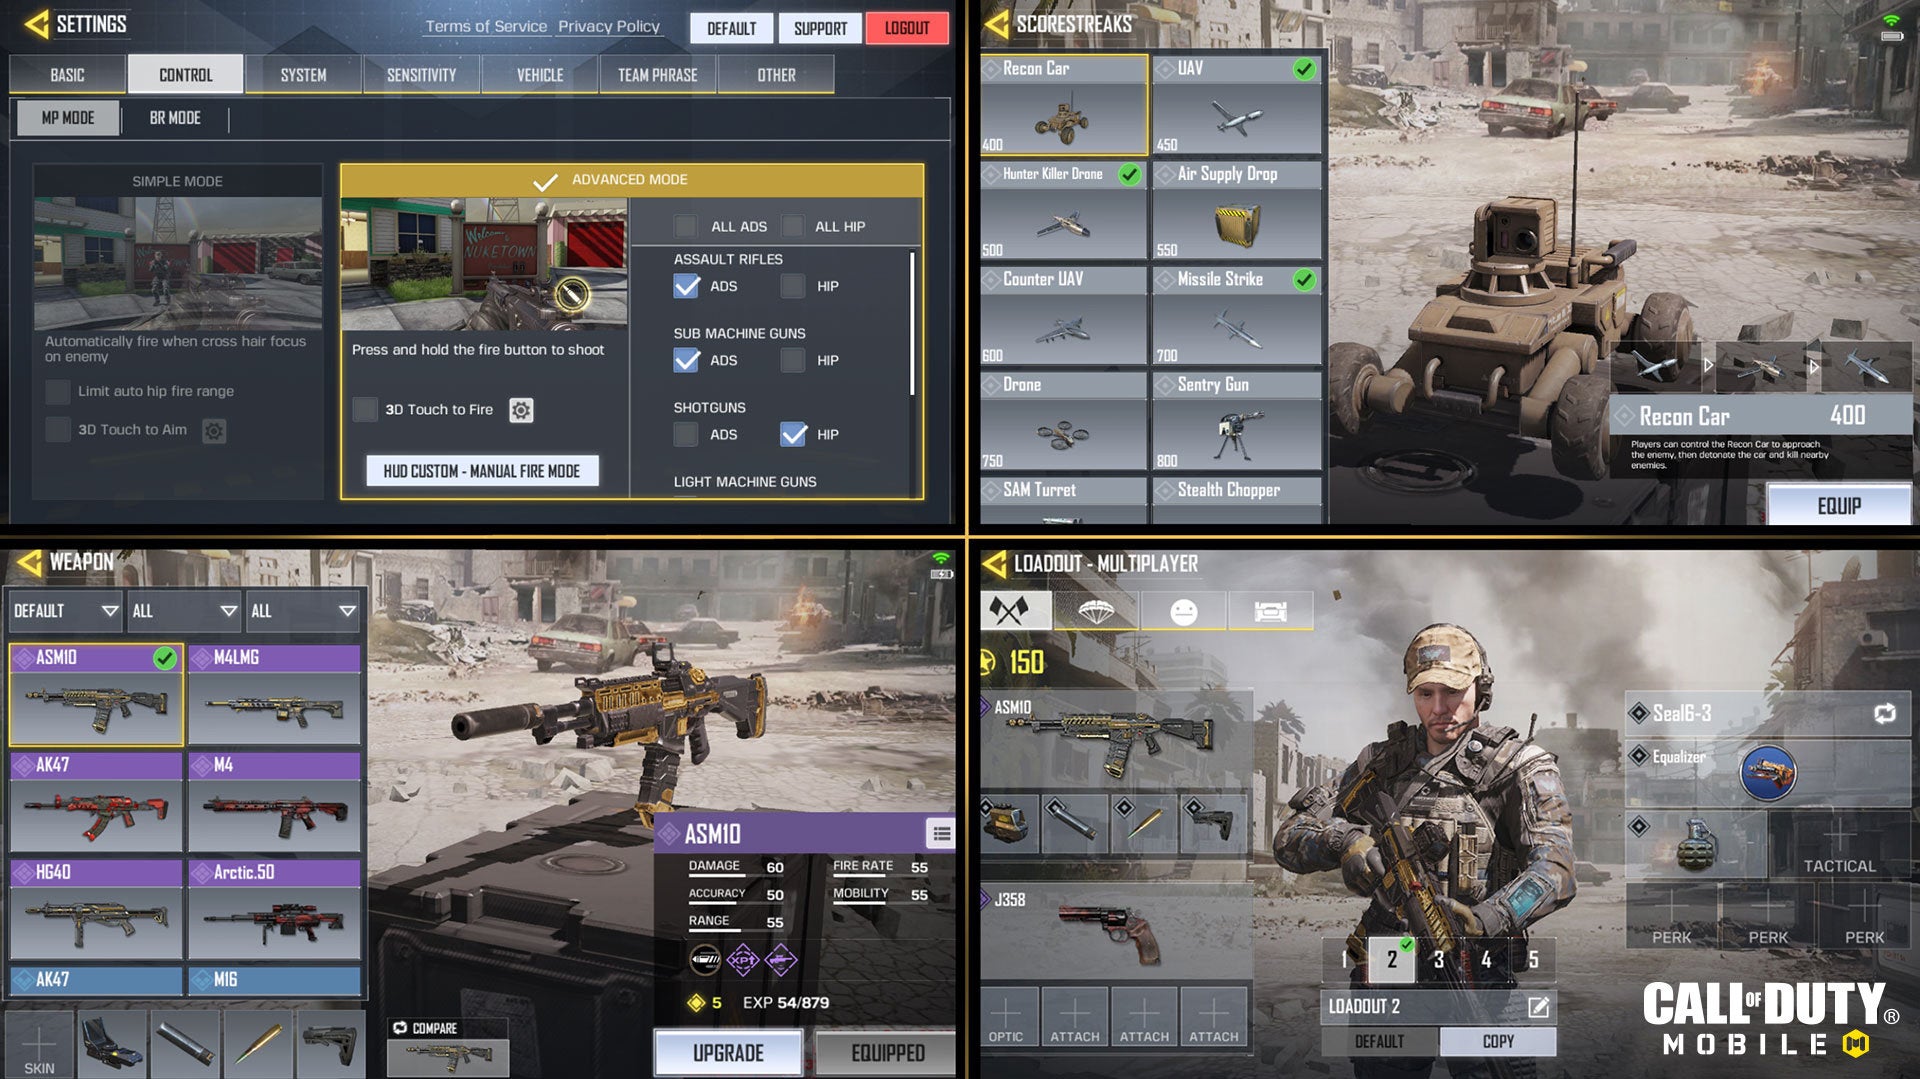 Call of Duty Mobile loadout - Call of Duty: Mobile beta starts for Android and iOS players in select countries